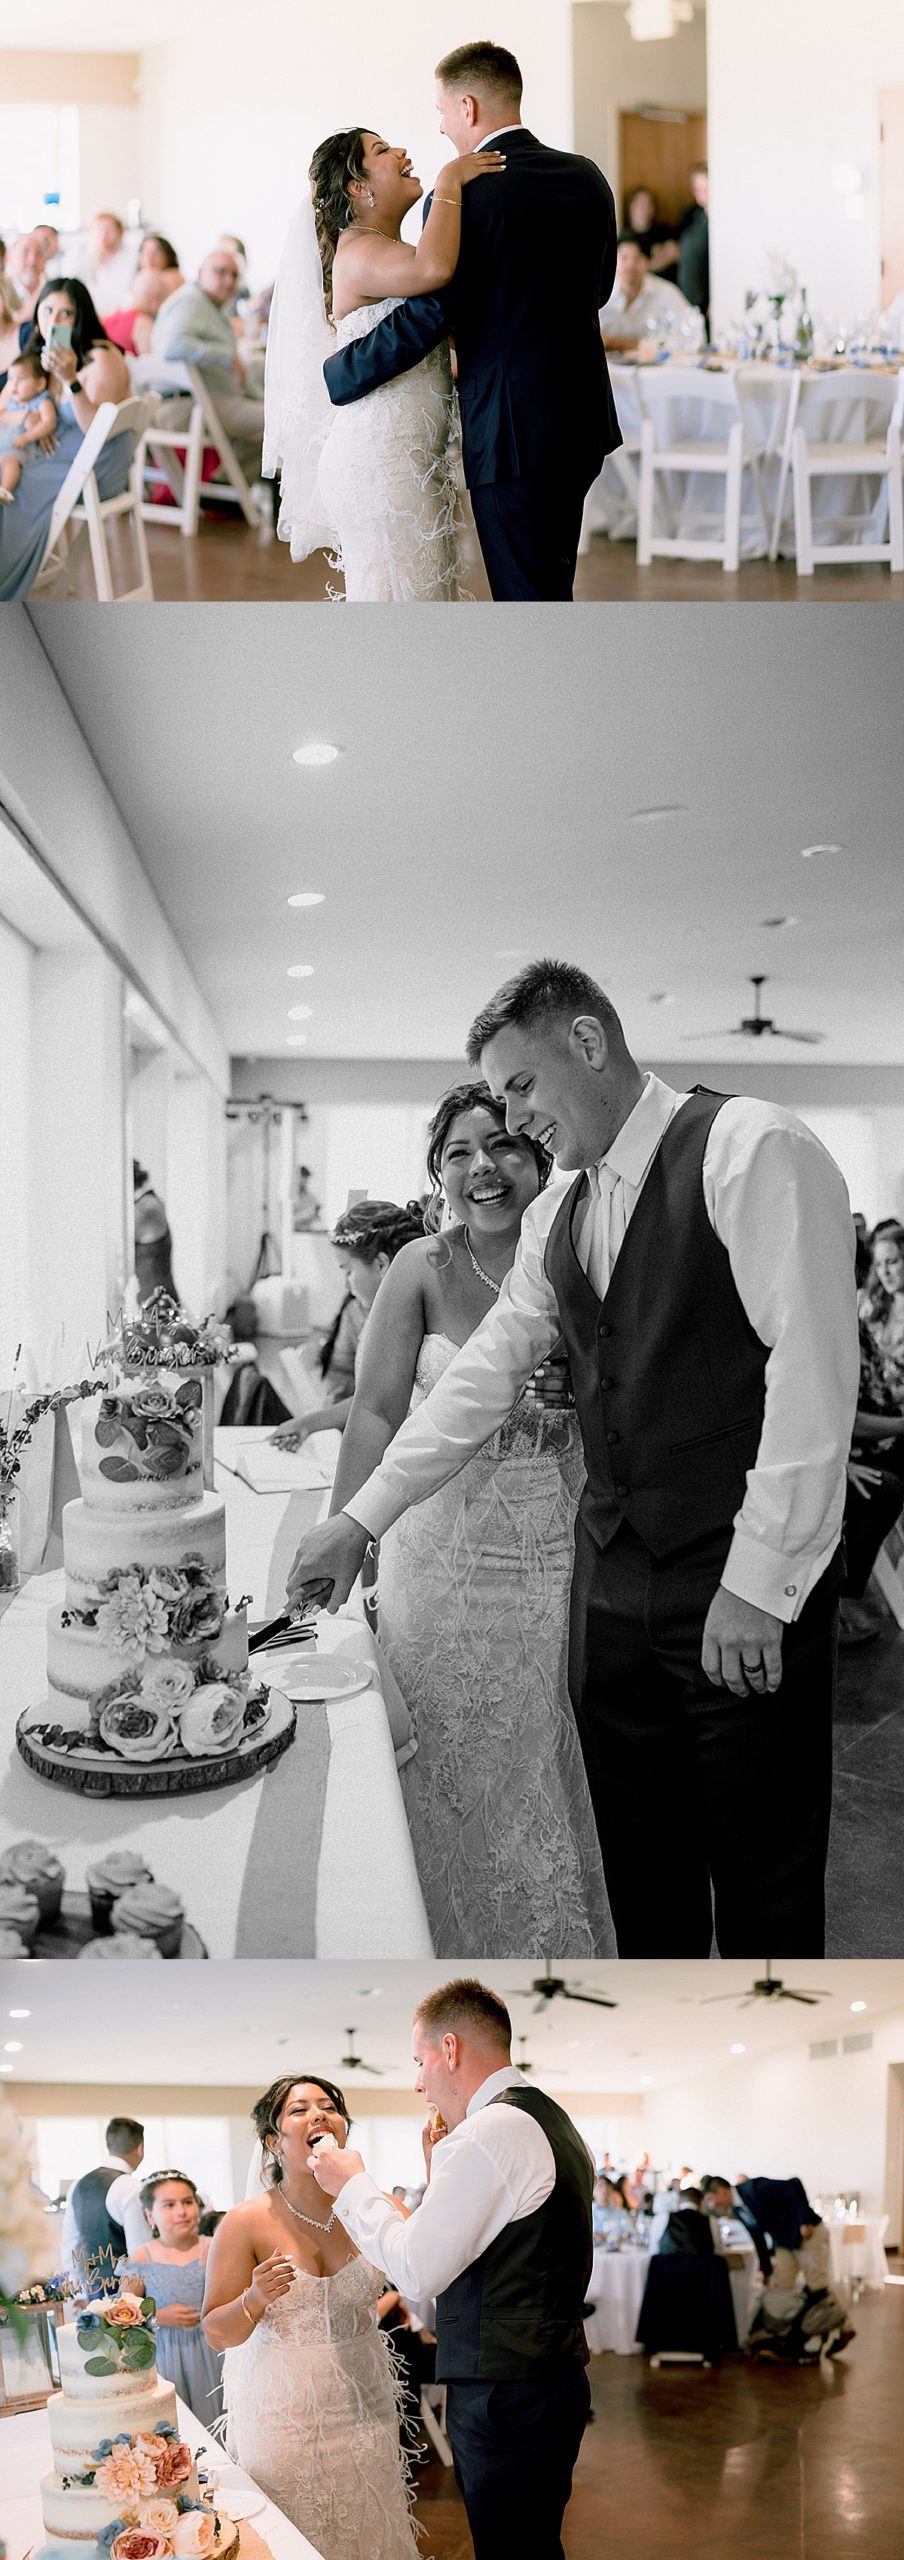 bride and groom cut cake at reception after Navarre beach wedding day 